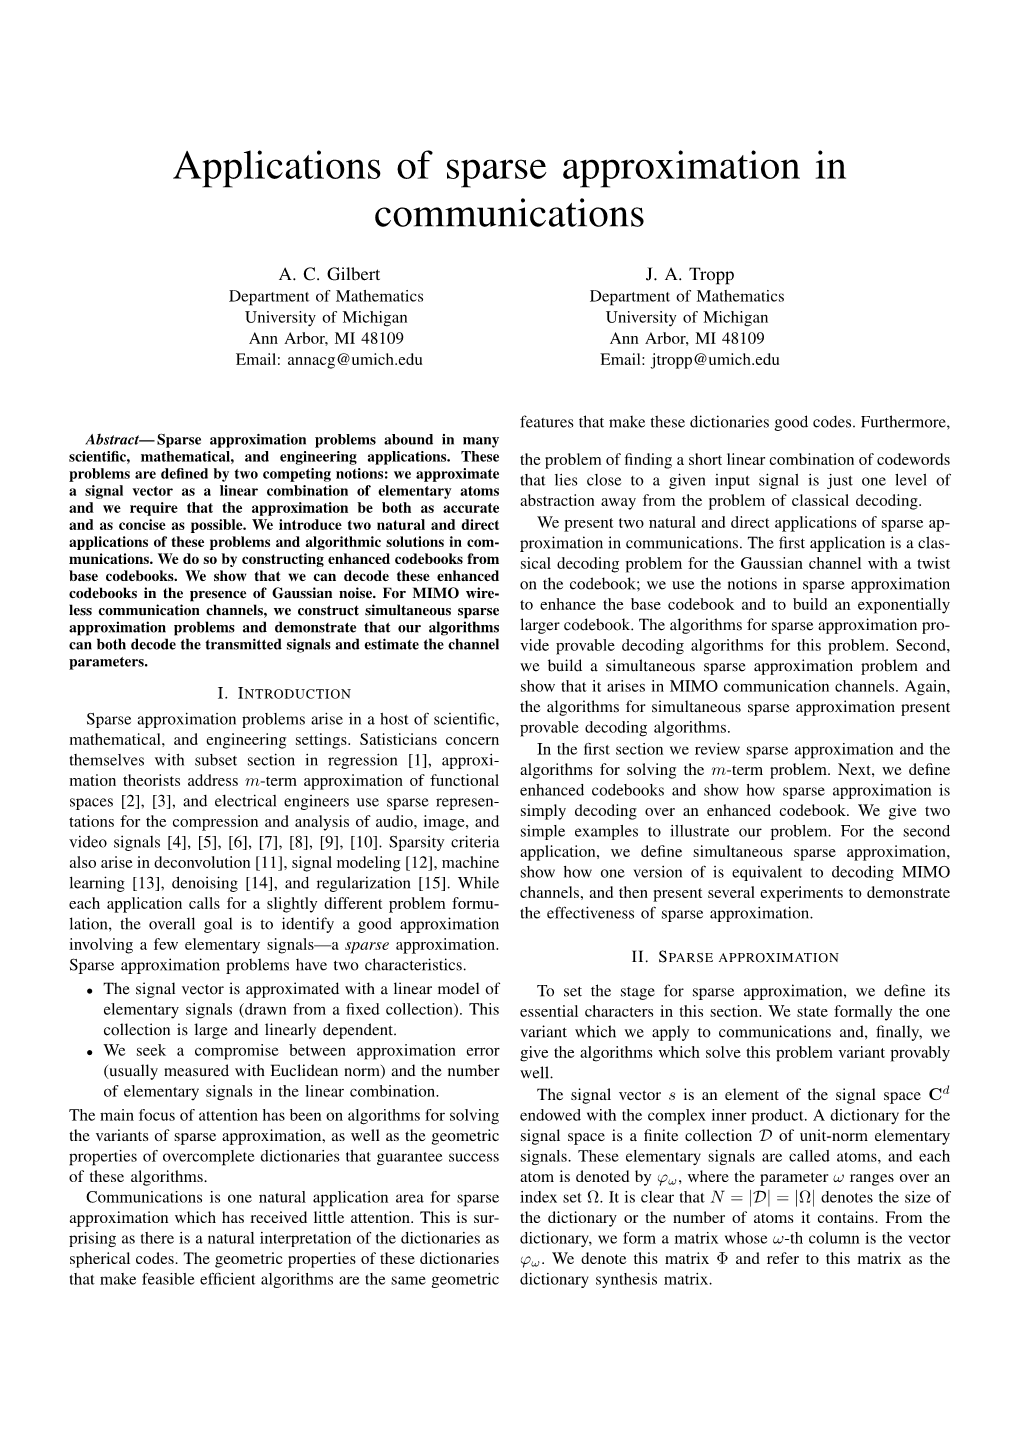 Applications of Sparse Approximation in Communications